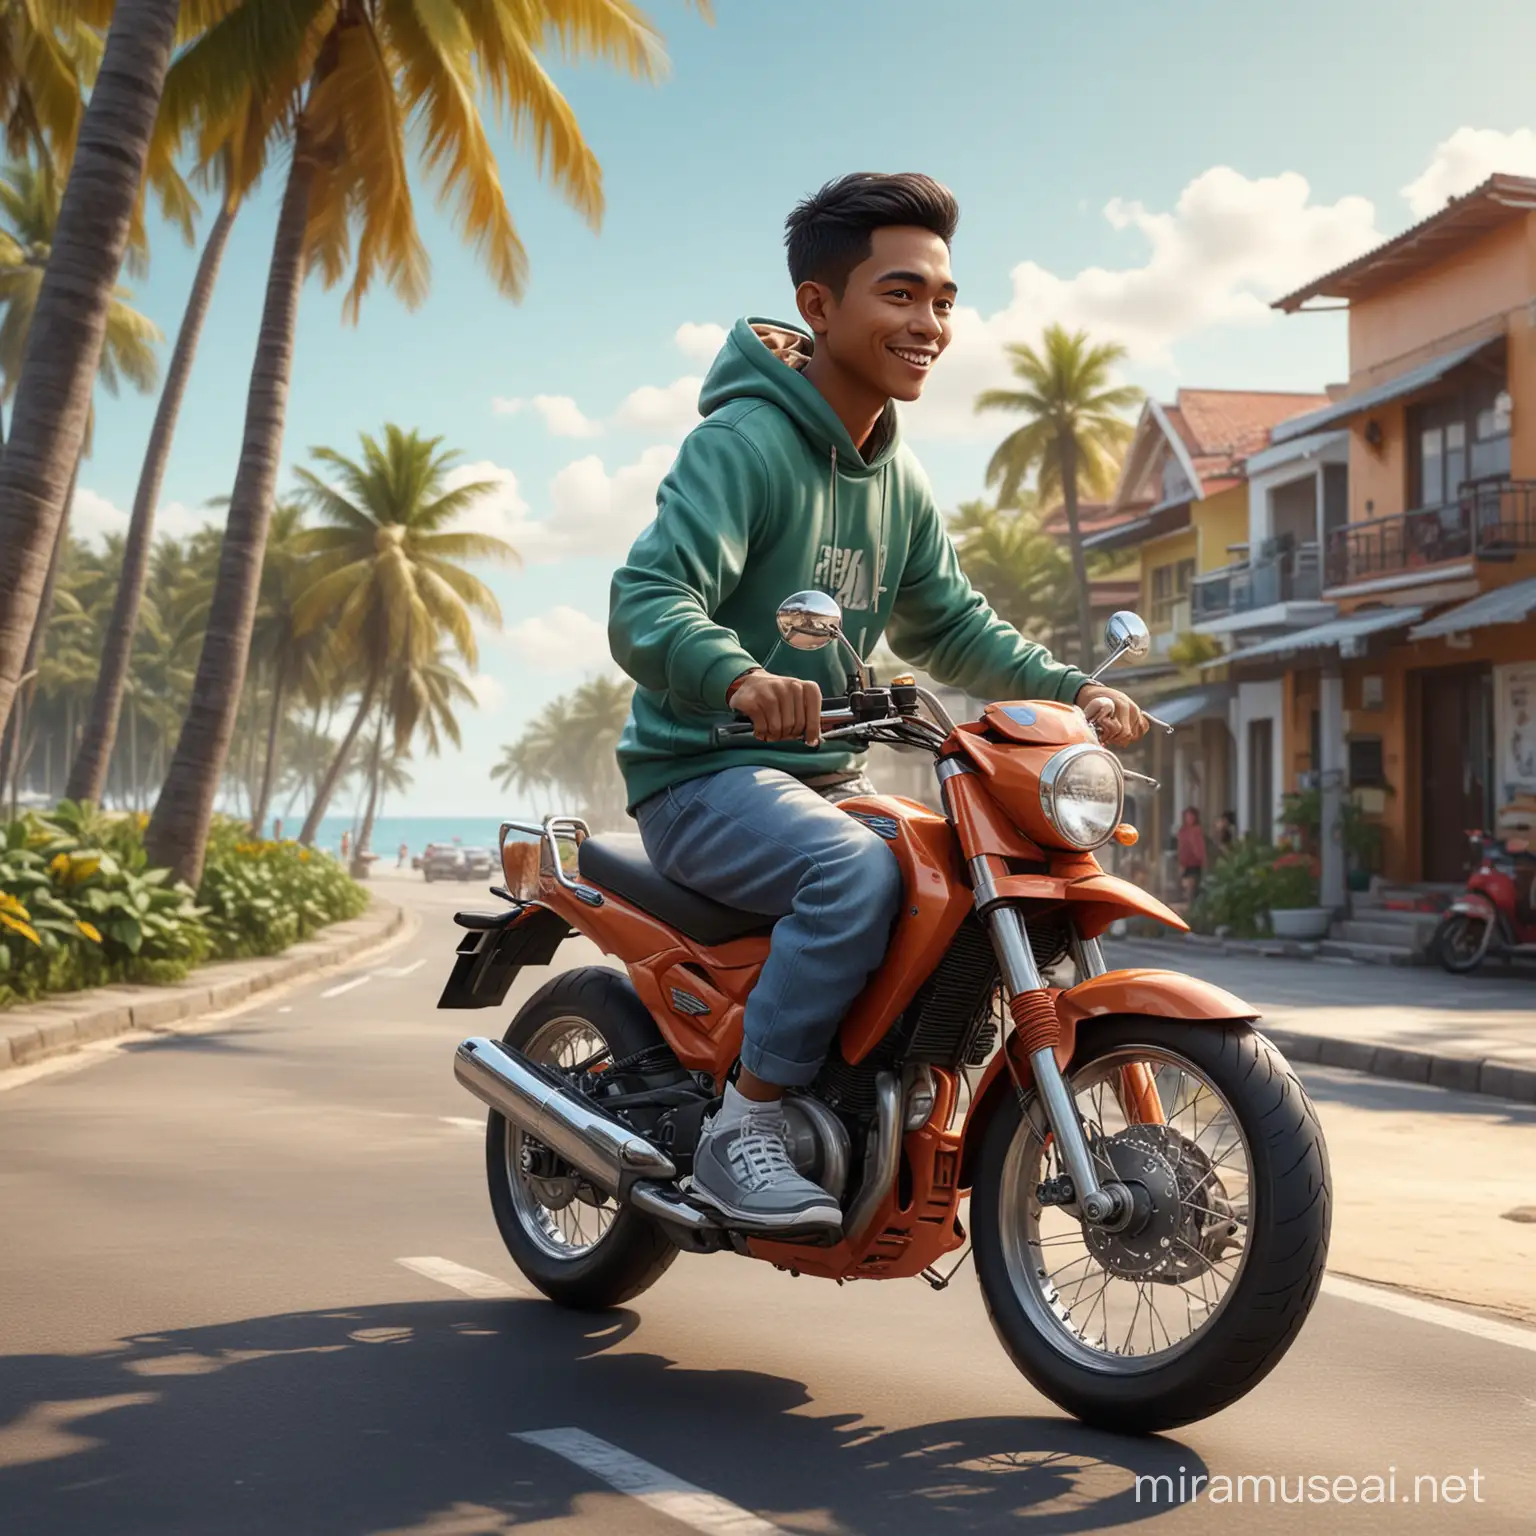 3d caricature of an Indonesian man with short hair is wearing a stylish hoodie and sneakers, riding a motor cycle near a beautiful beach with a typical Indonesian street background. The hyper-realistic rendering emphasizes high contrast and vibrant colors, providing an 8K resolution for intricate details. The focus is on capturing the dynamic essence of the man enjoying his ride in this scenic and lively environment.